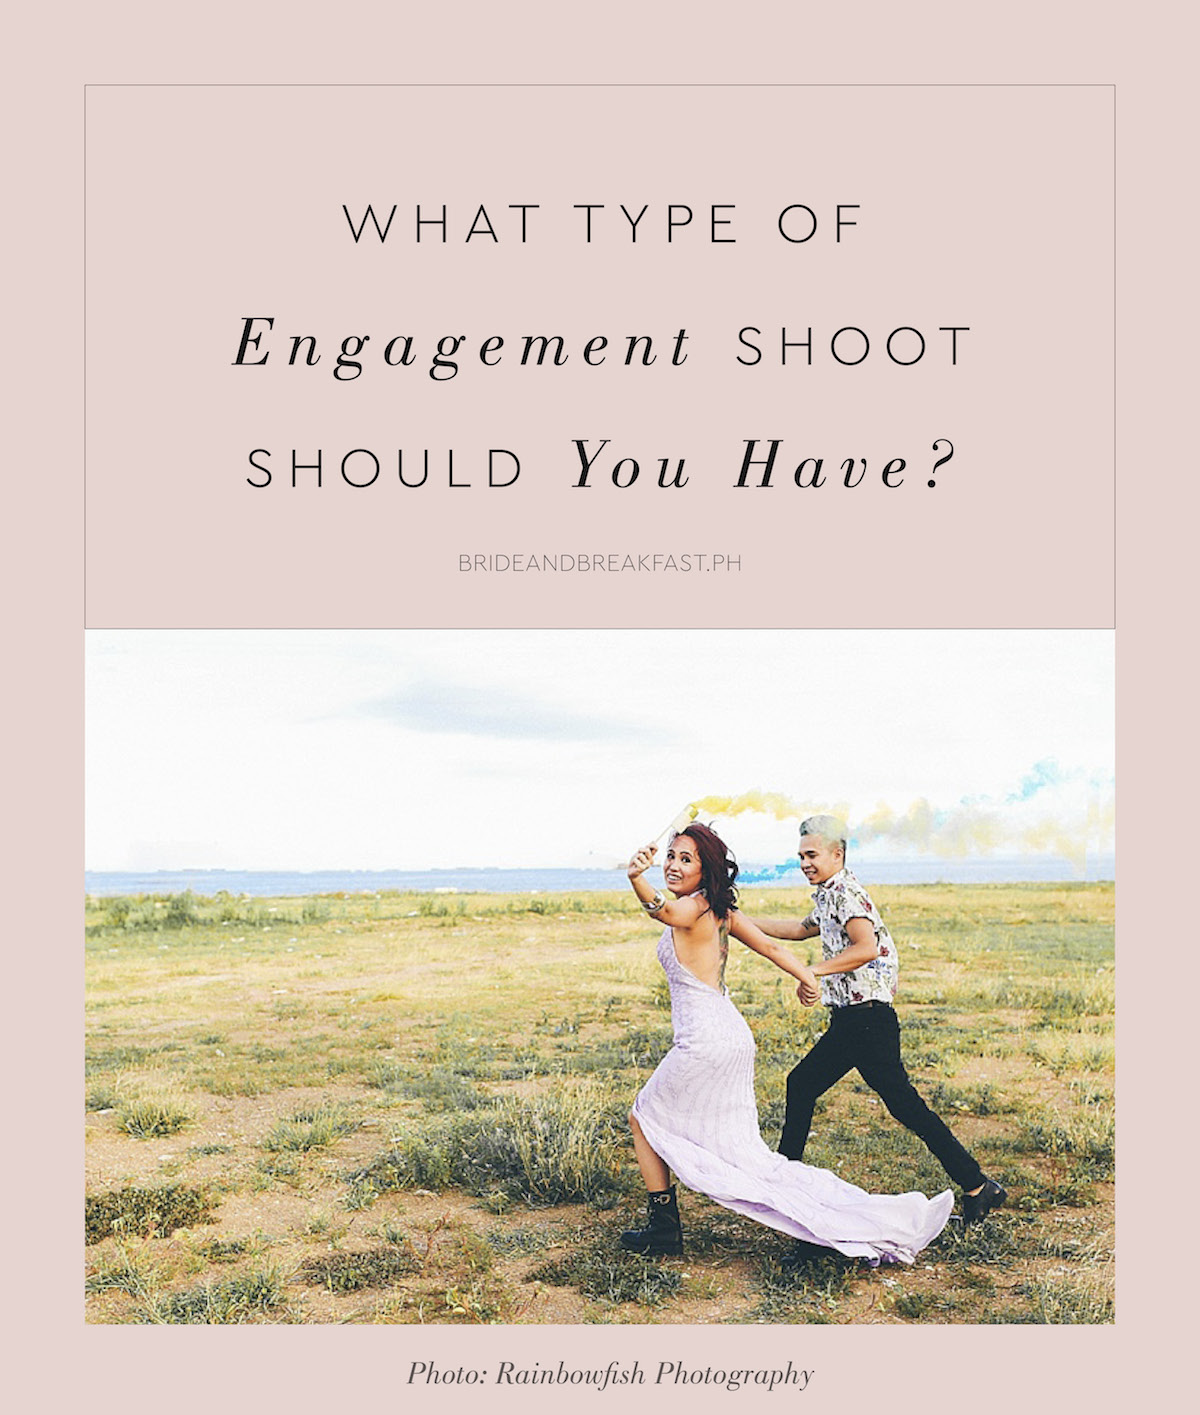 What Type of Engagement Shoot Theme Should You Have? Photo: Rainbowfish Photography